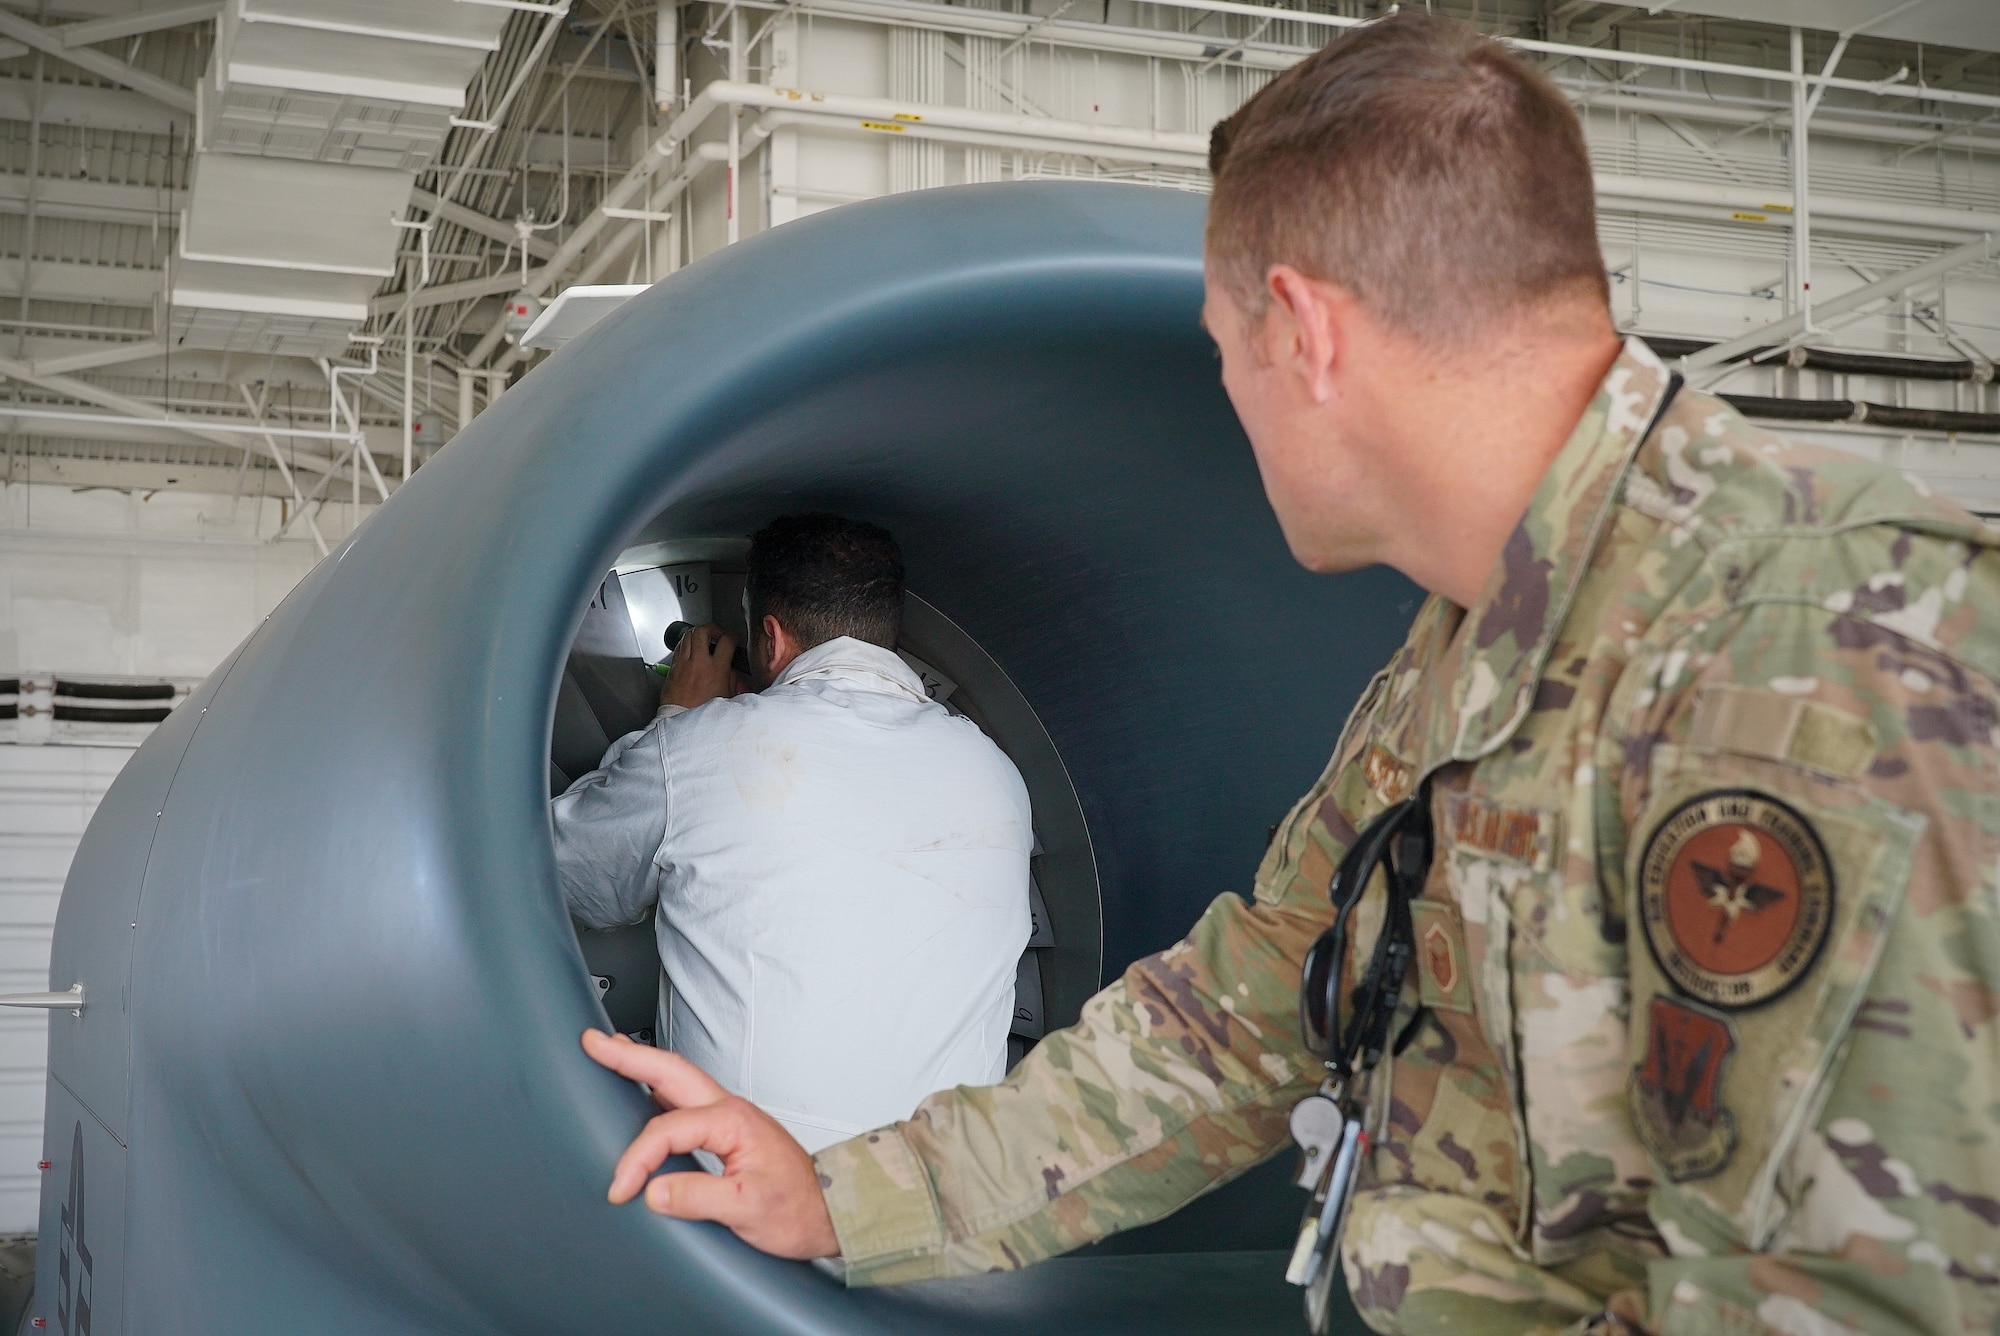 A uniformed military member on the right-hand side of the frame looks on as his coworker in a protective smock inspects the turbine of an aircraft with a flashlight.